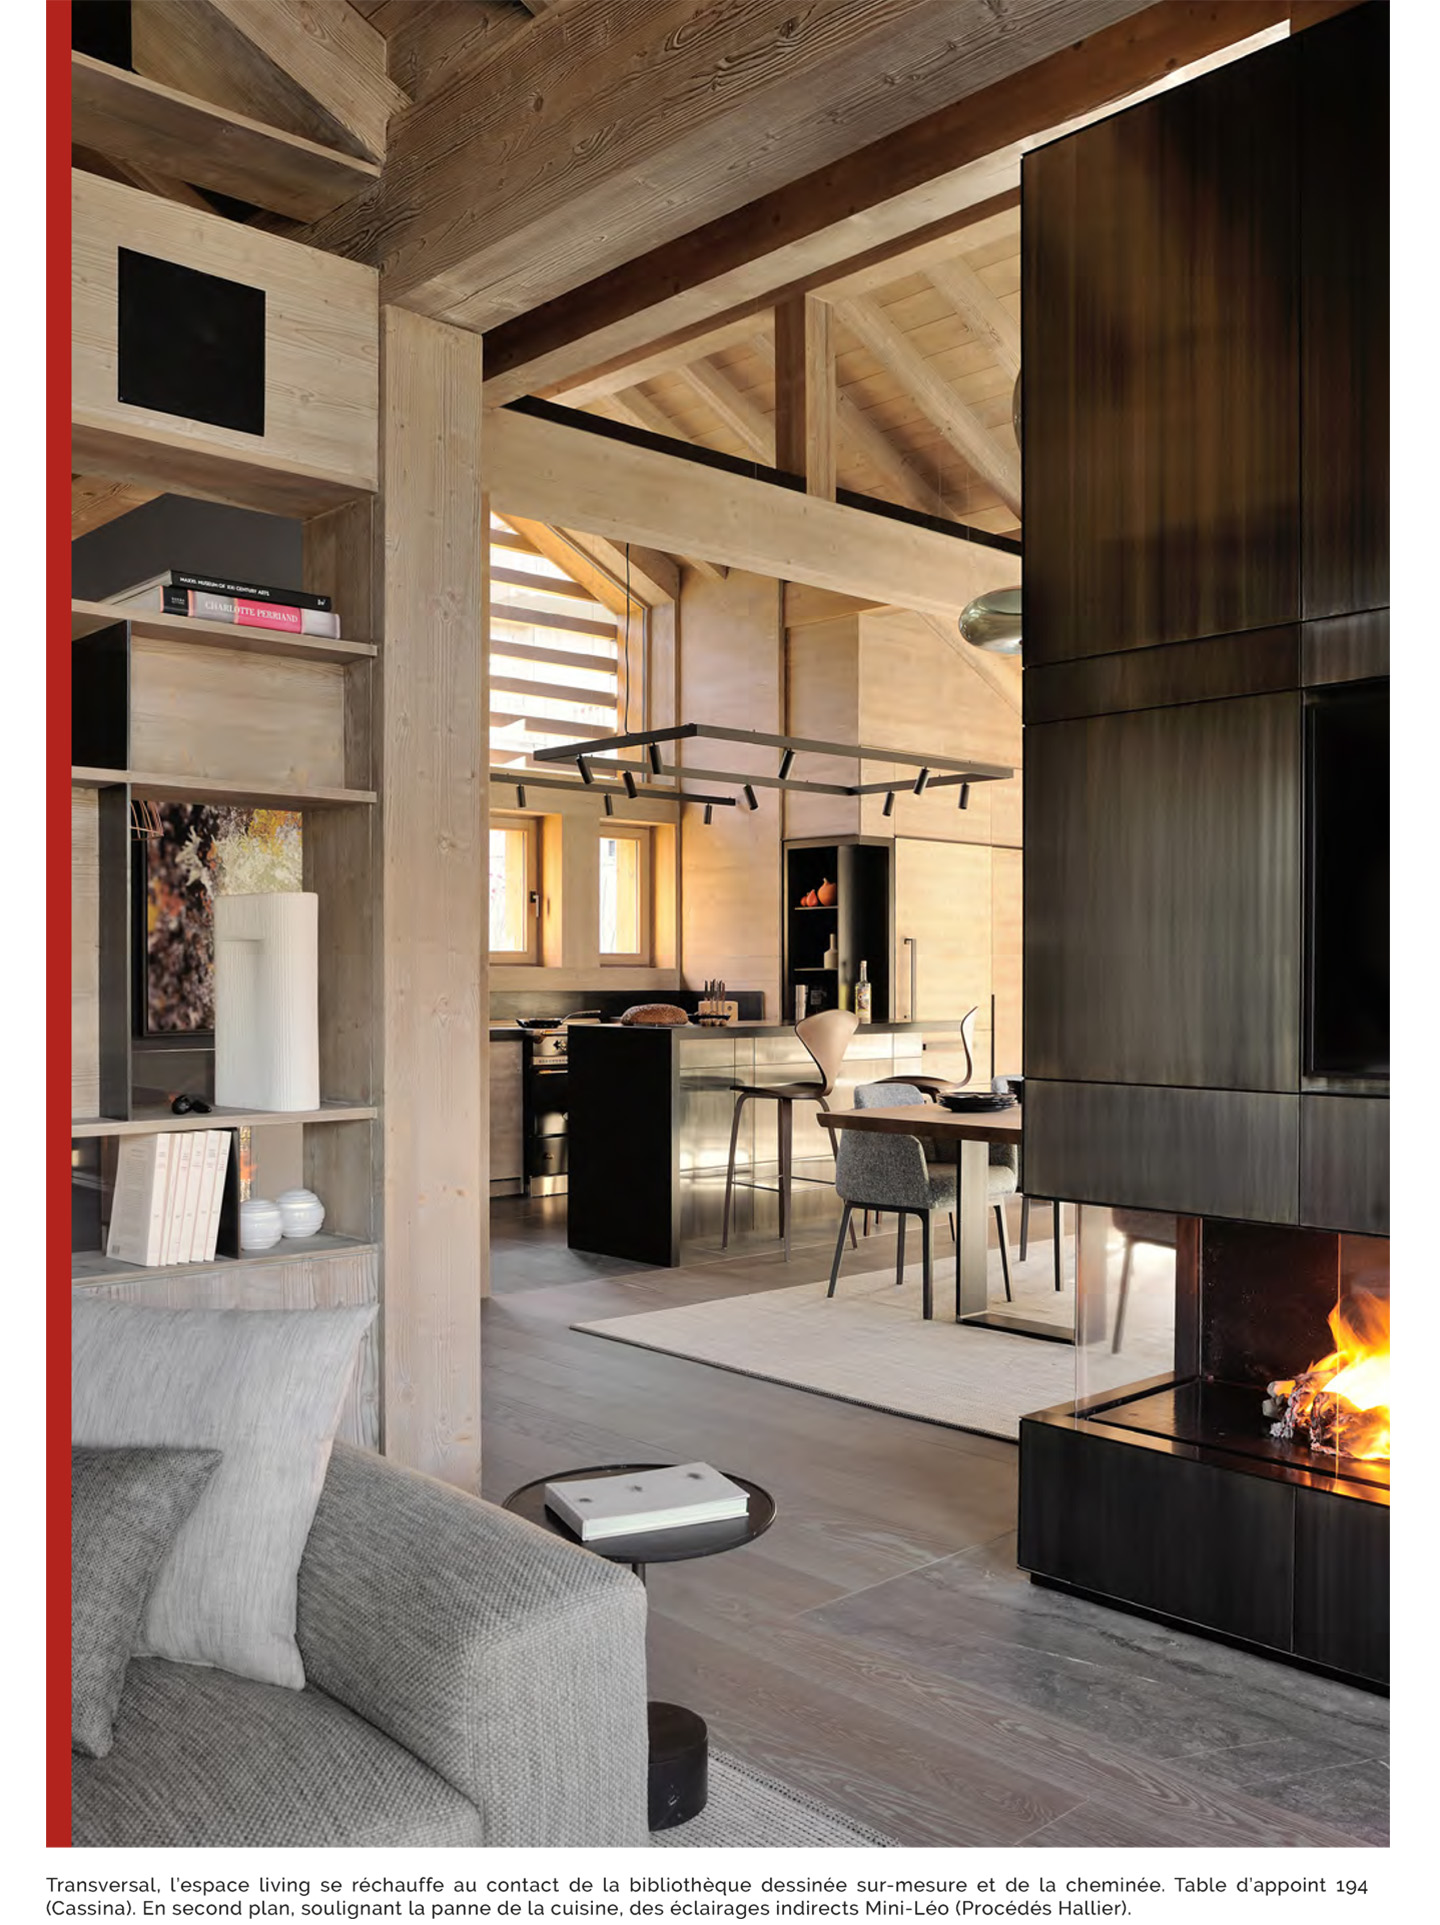 Article on the chalet kirana of meribel realized by the studio jean-philippe nuel in the magazine domodéco, luxury private chalet, interior design, interior decoration, luxury interior, designer